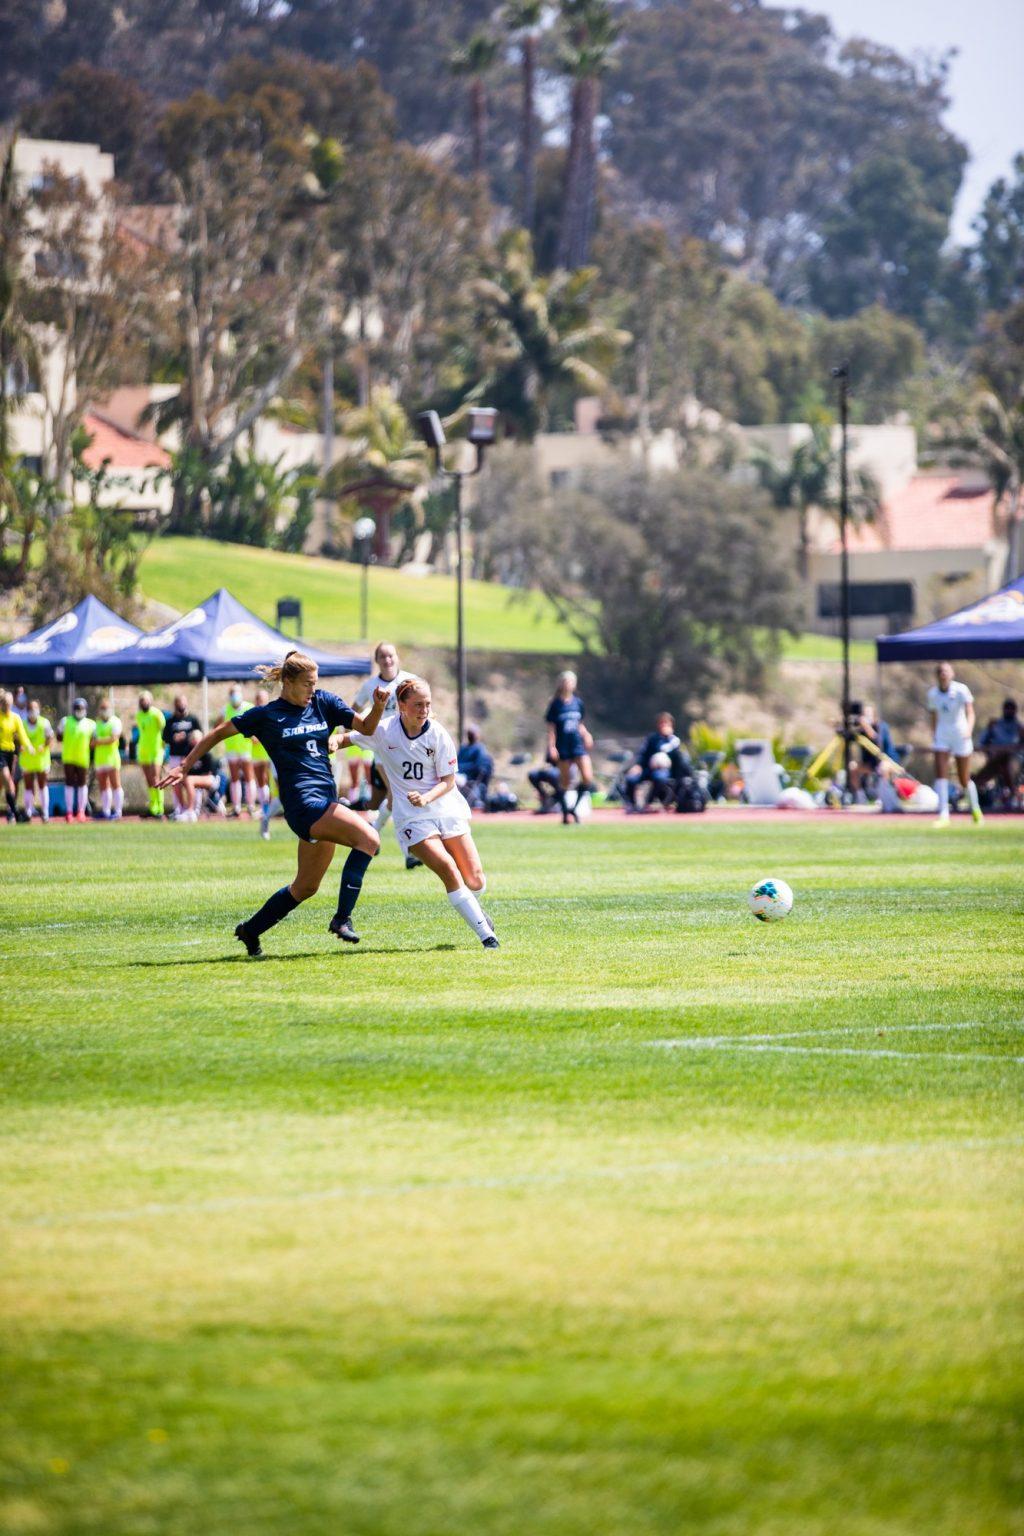 Freshman forward Tori Waldeck delivers a composed finish from the top of the penalty area as San Diego freshman Katie Baxter pursues. Waldeck's goal was Pepperdine's fifth in the first 19 minutes of the match and her fourth of the season.